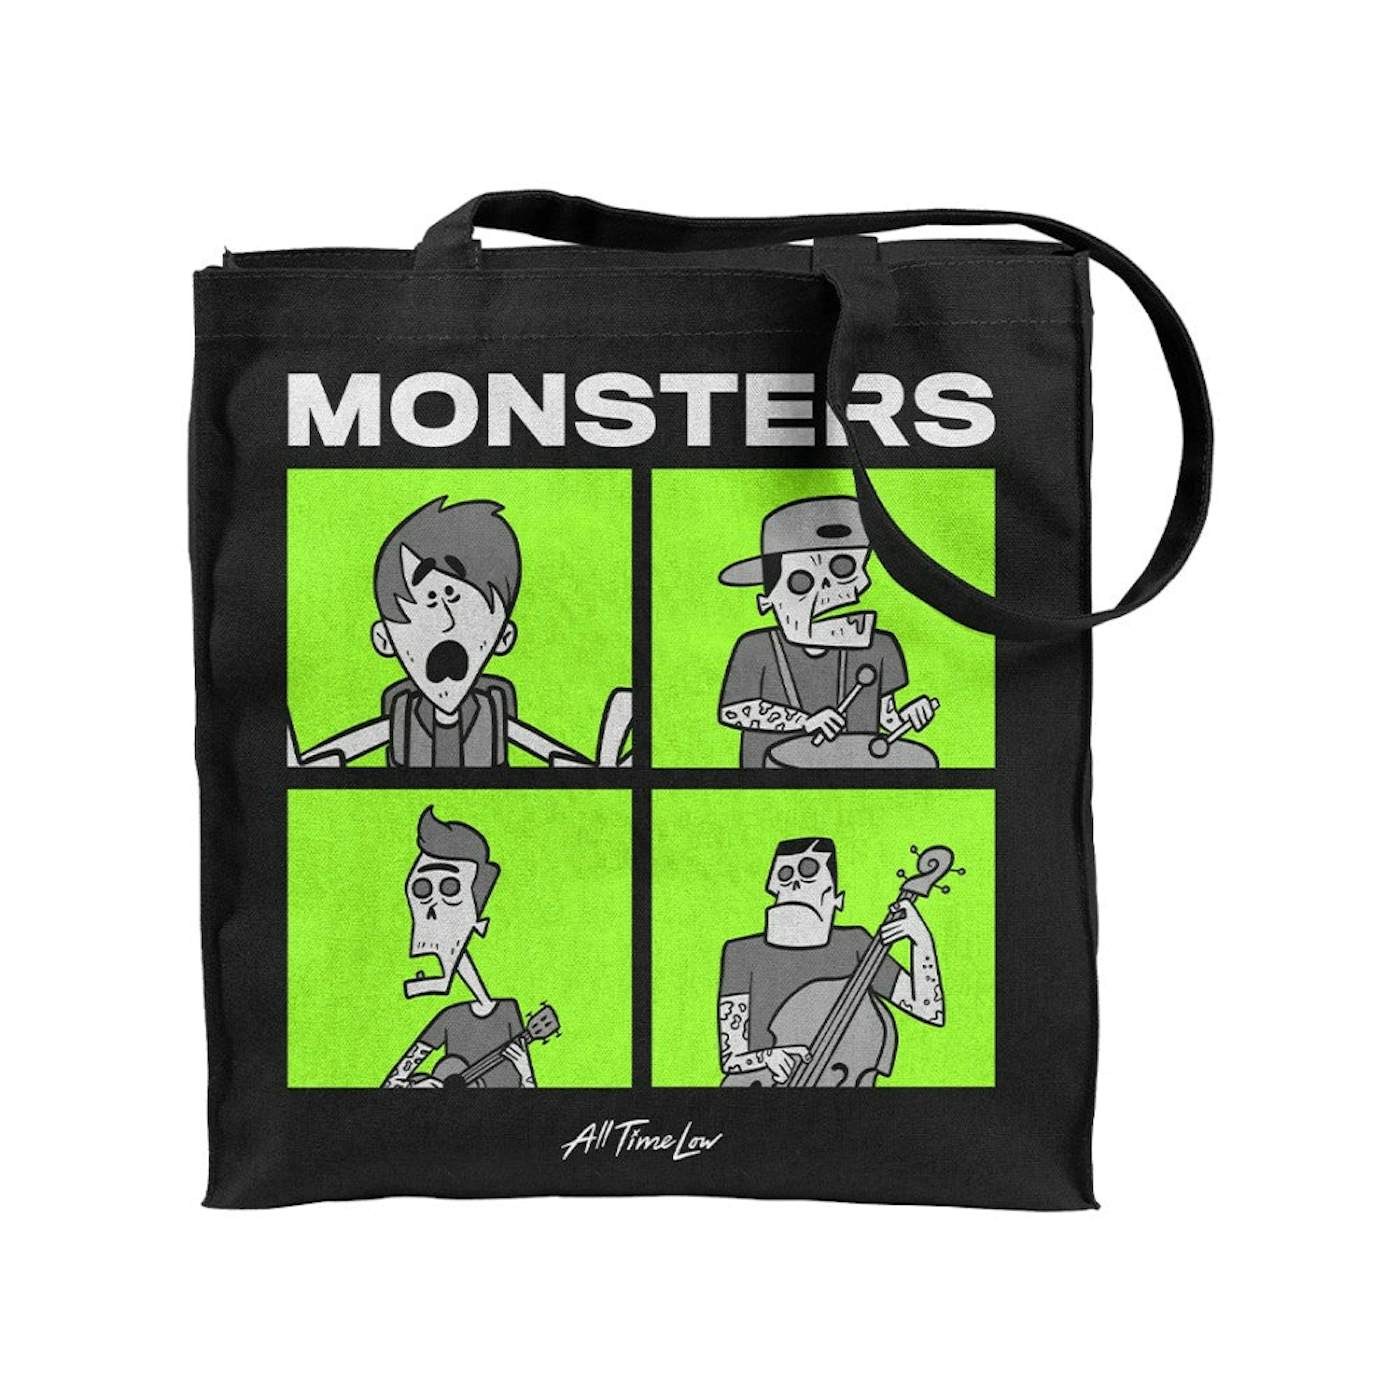 All Time Low Monsters Tote Bag